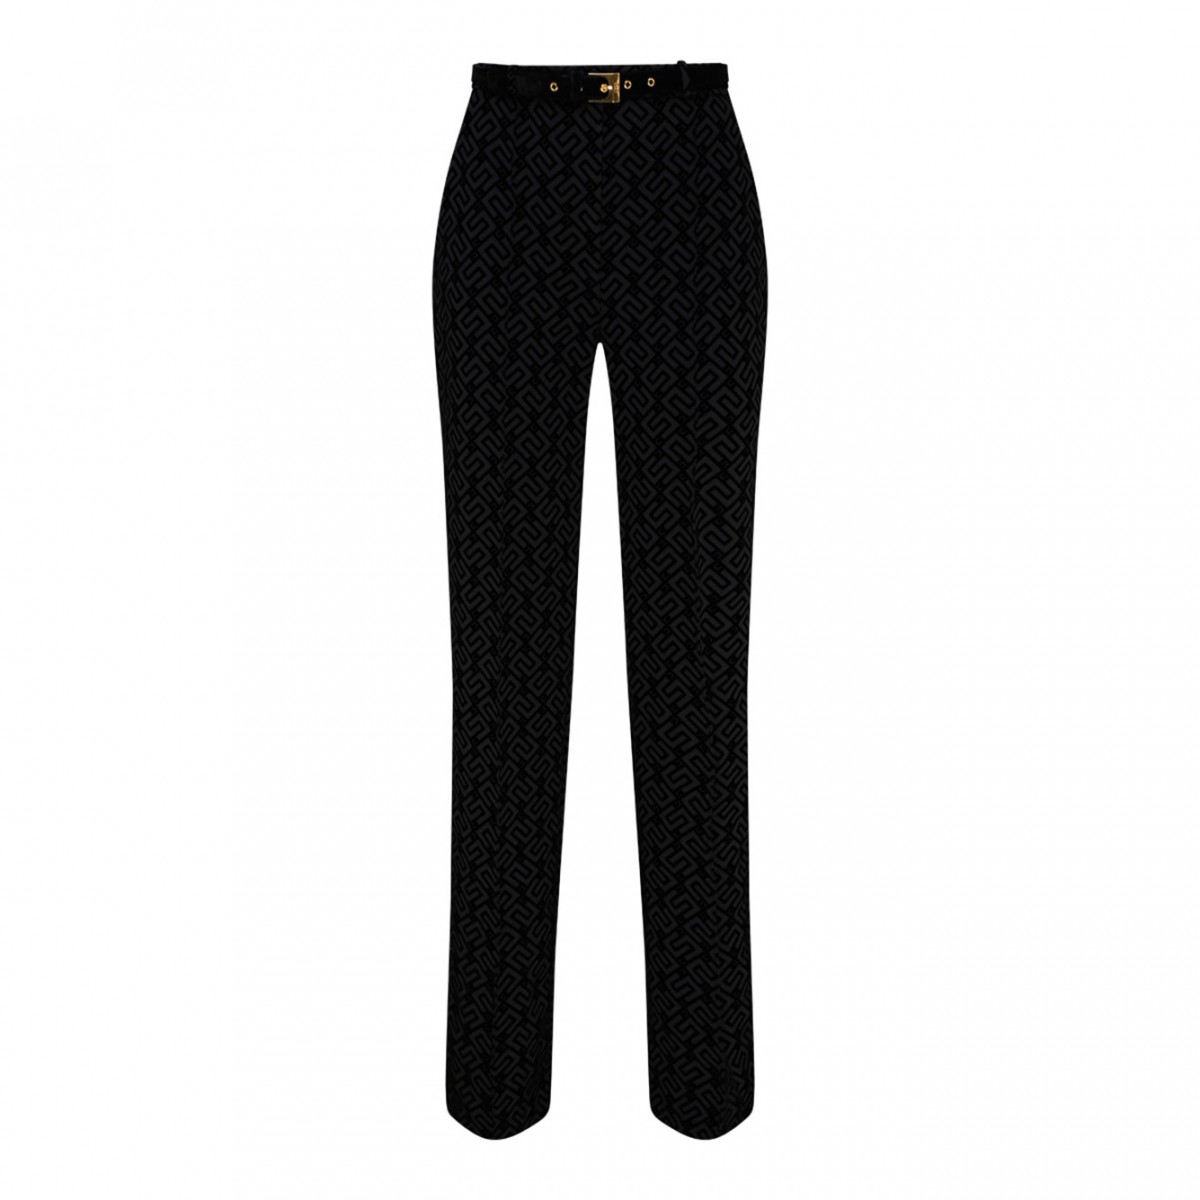 Black Stretch Cotton Tailored Trousers